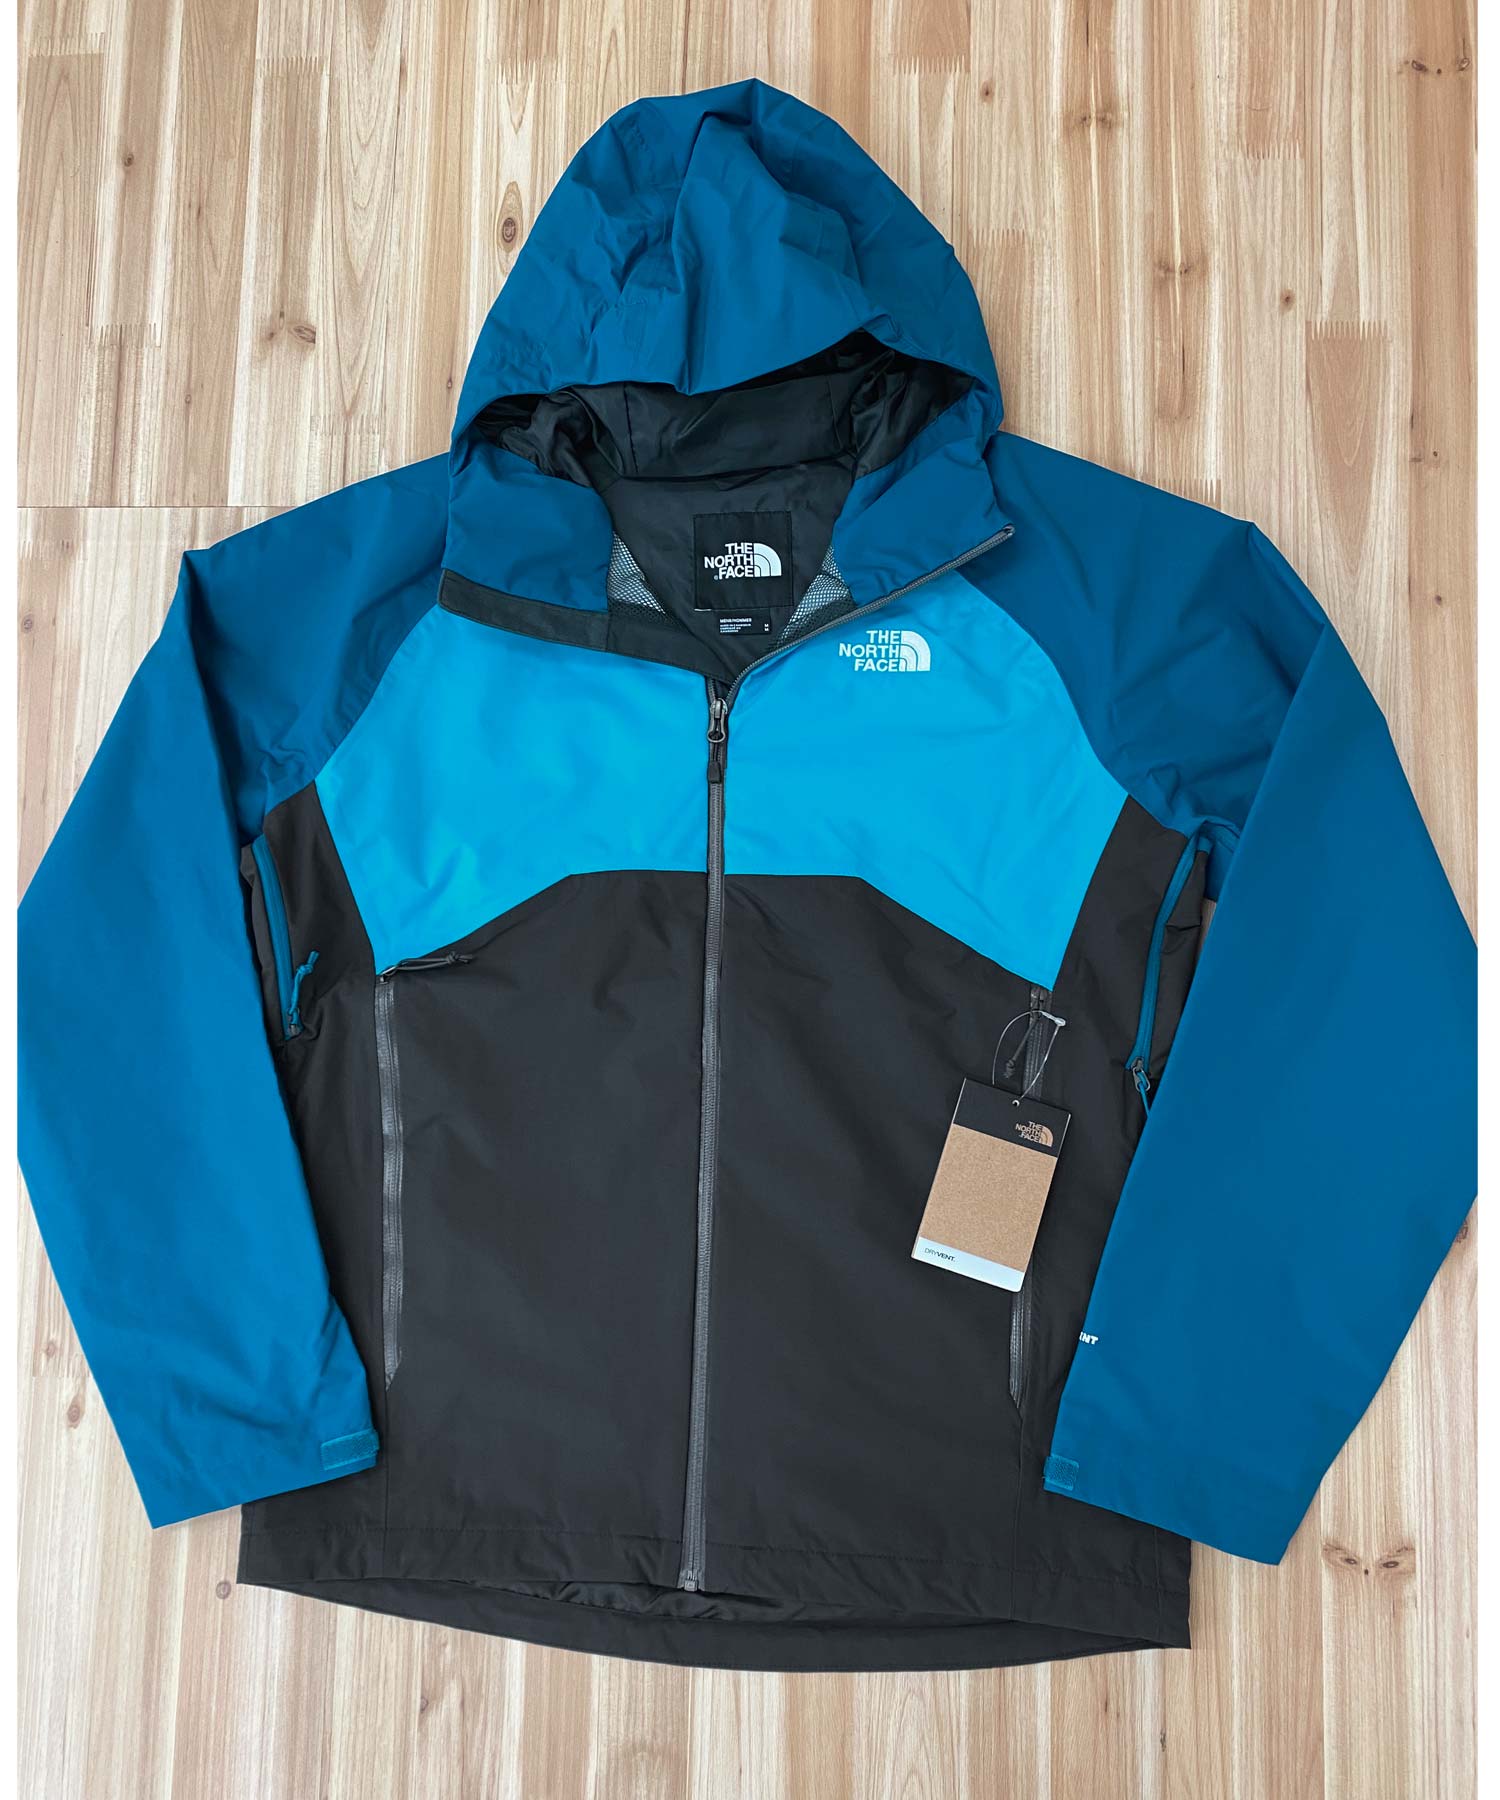 THE NORTH FACE DRYVENT ナイロンジャケット